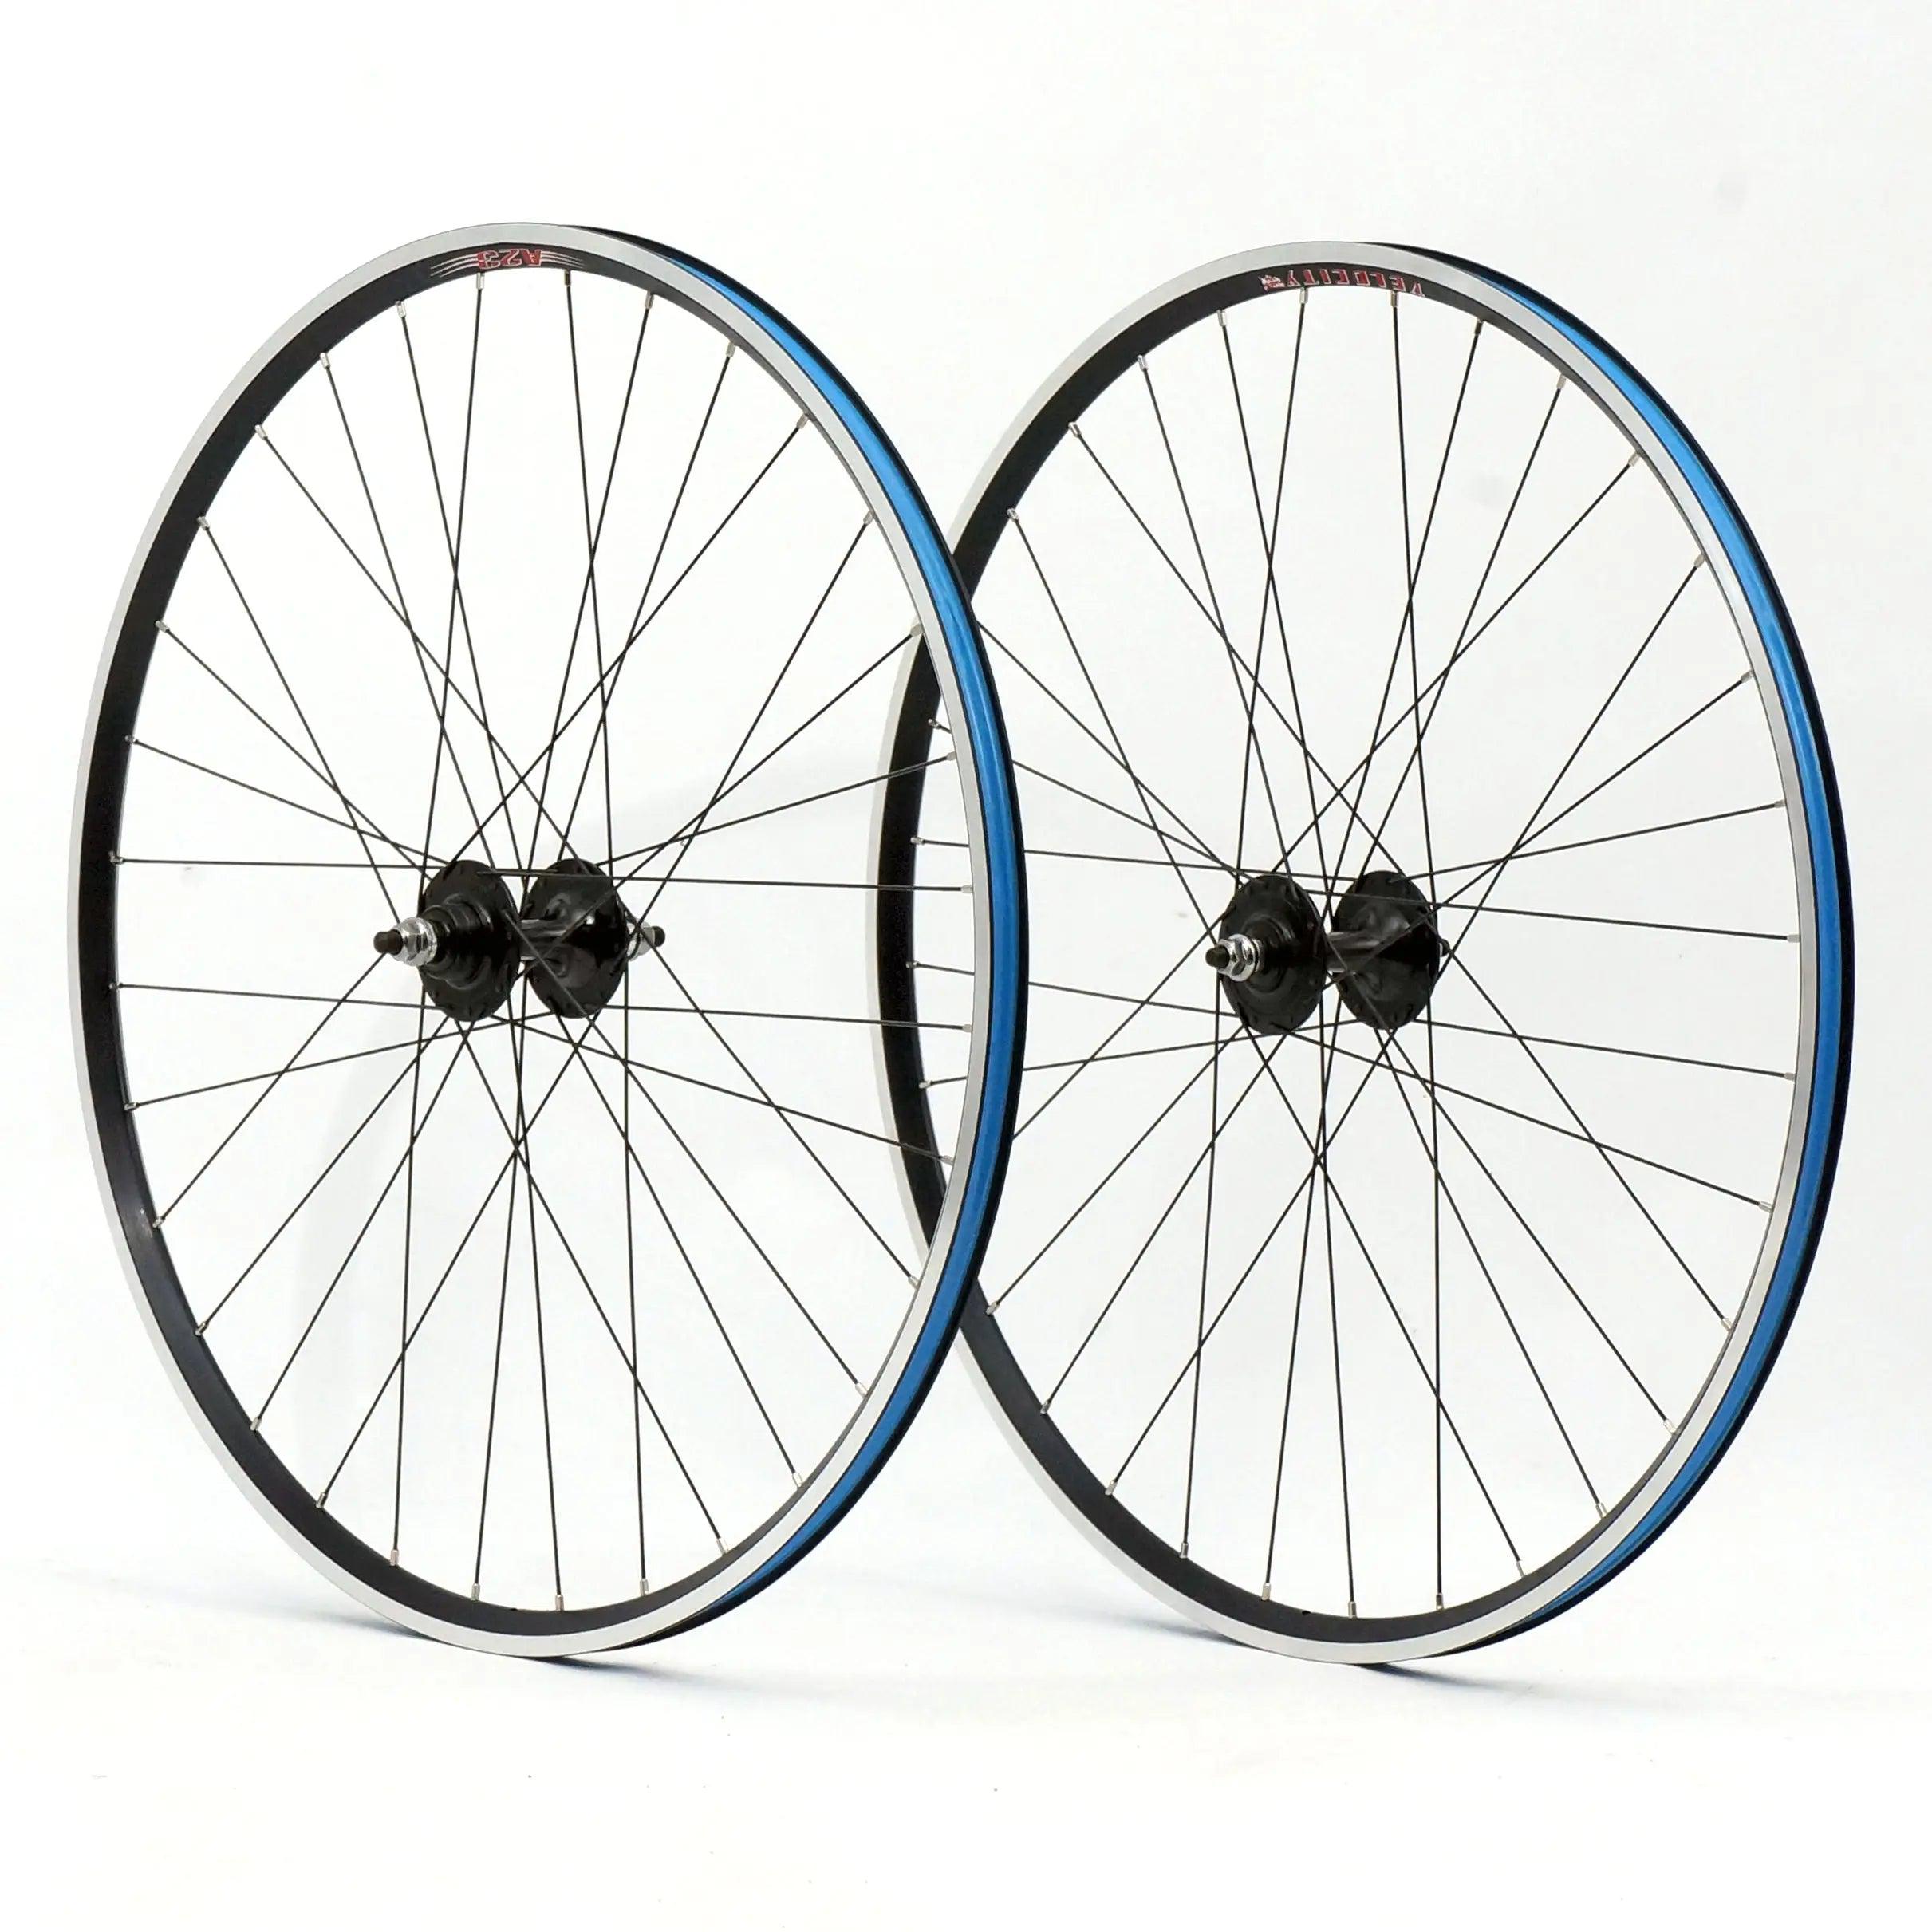 Velocity A23 700C 32H/32H Single Speed/Fixed Gear/Cyclocross Tubeless-Ready Wheelset-Wabi Cycles